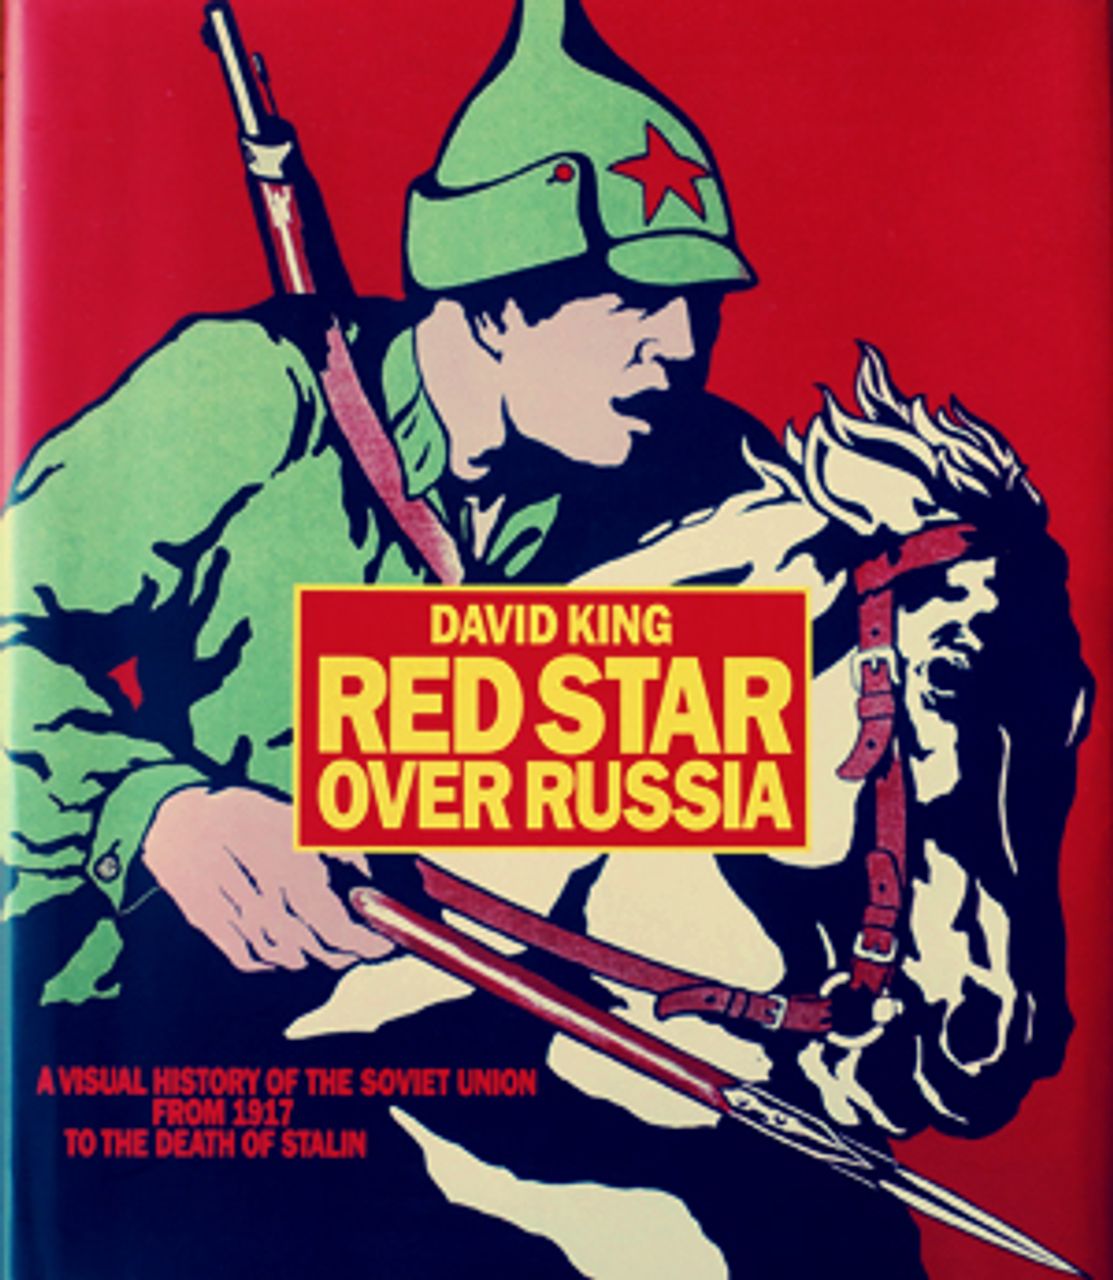 Buy Now - Red Star Over Russia